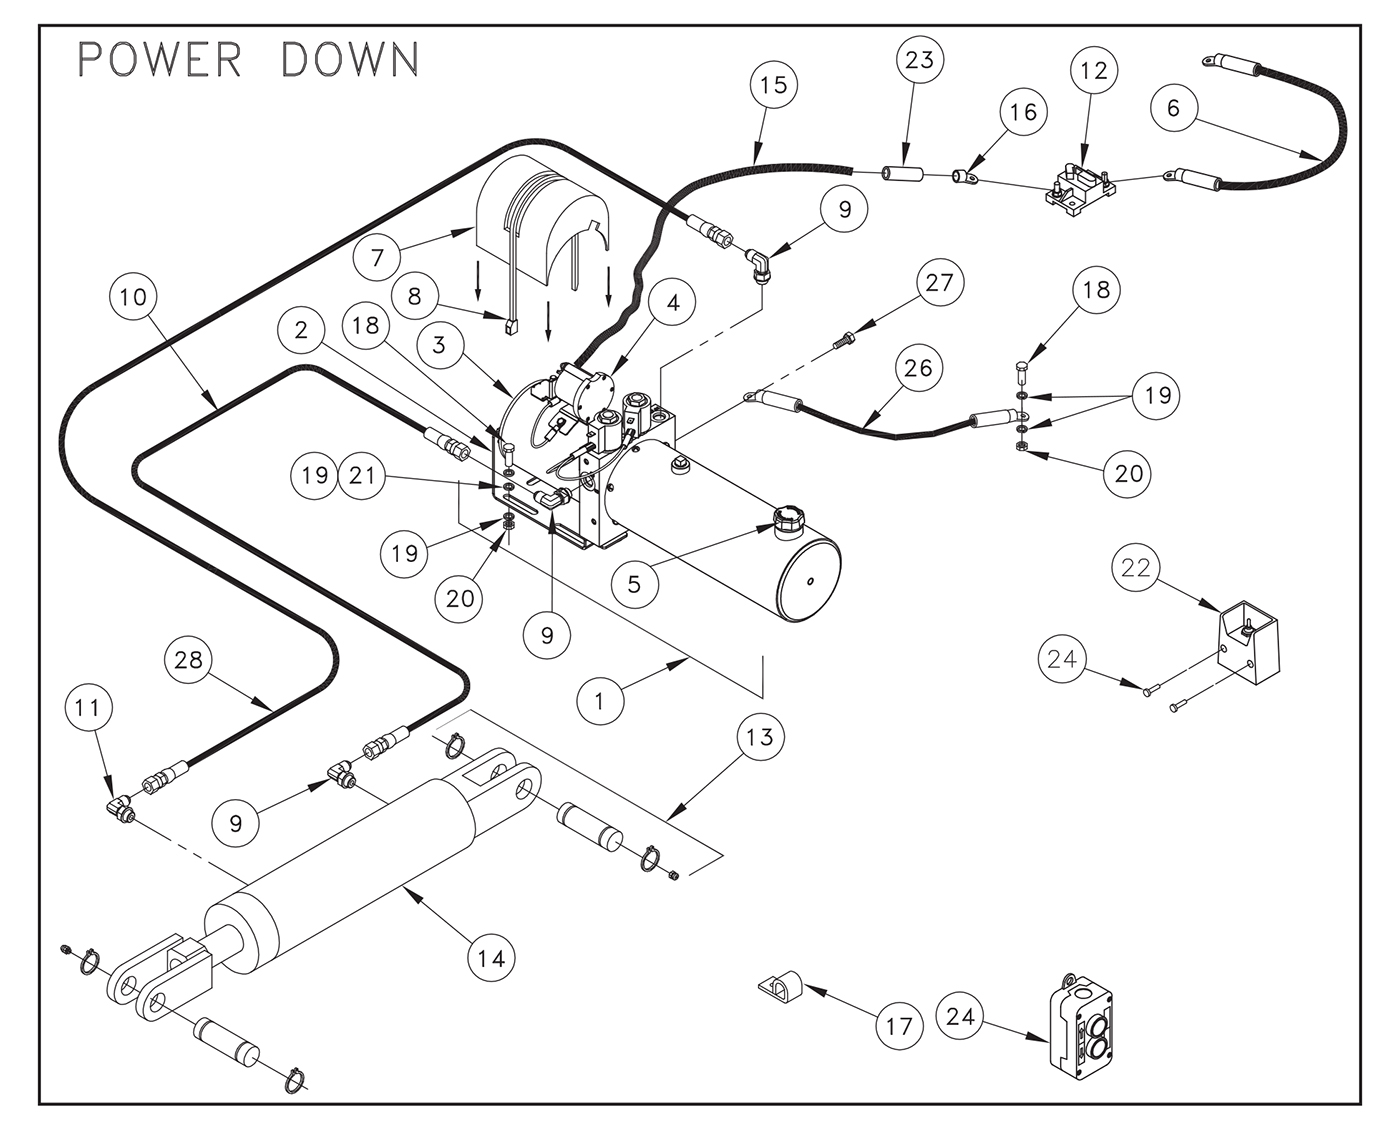 ST22 Electric Control/Power Down Pump Assembly Diagram